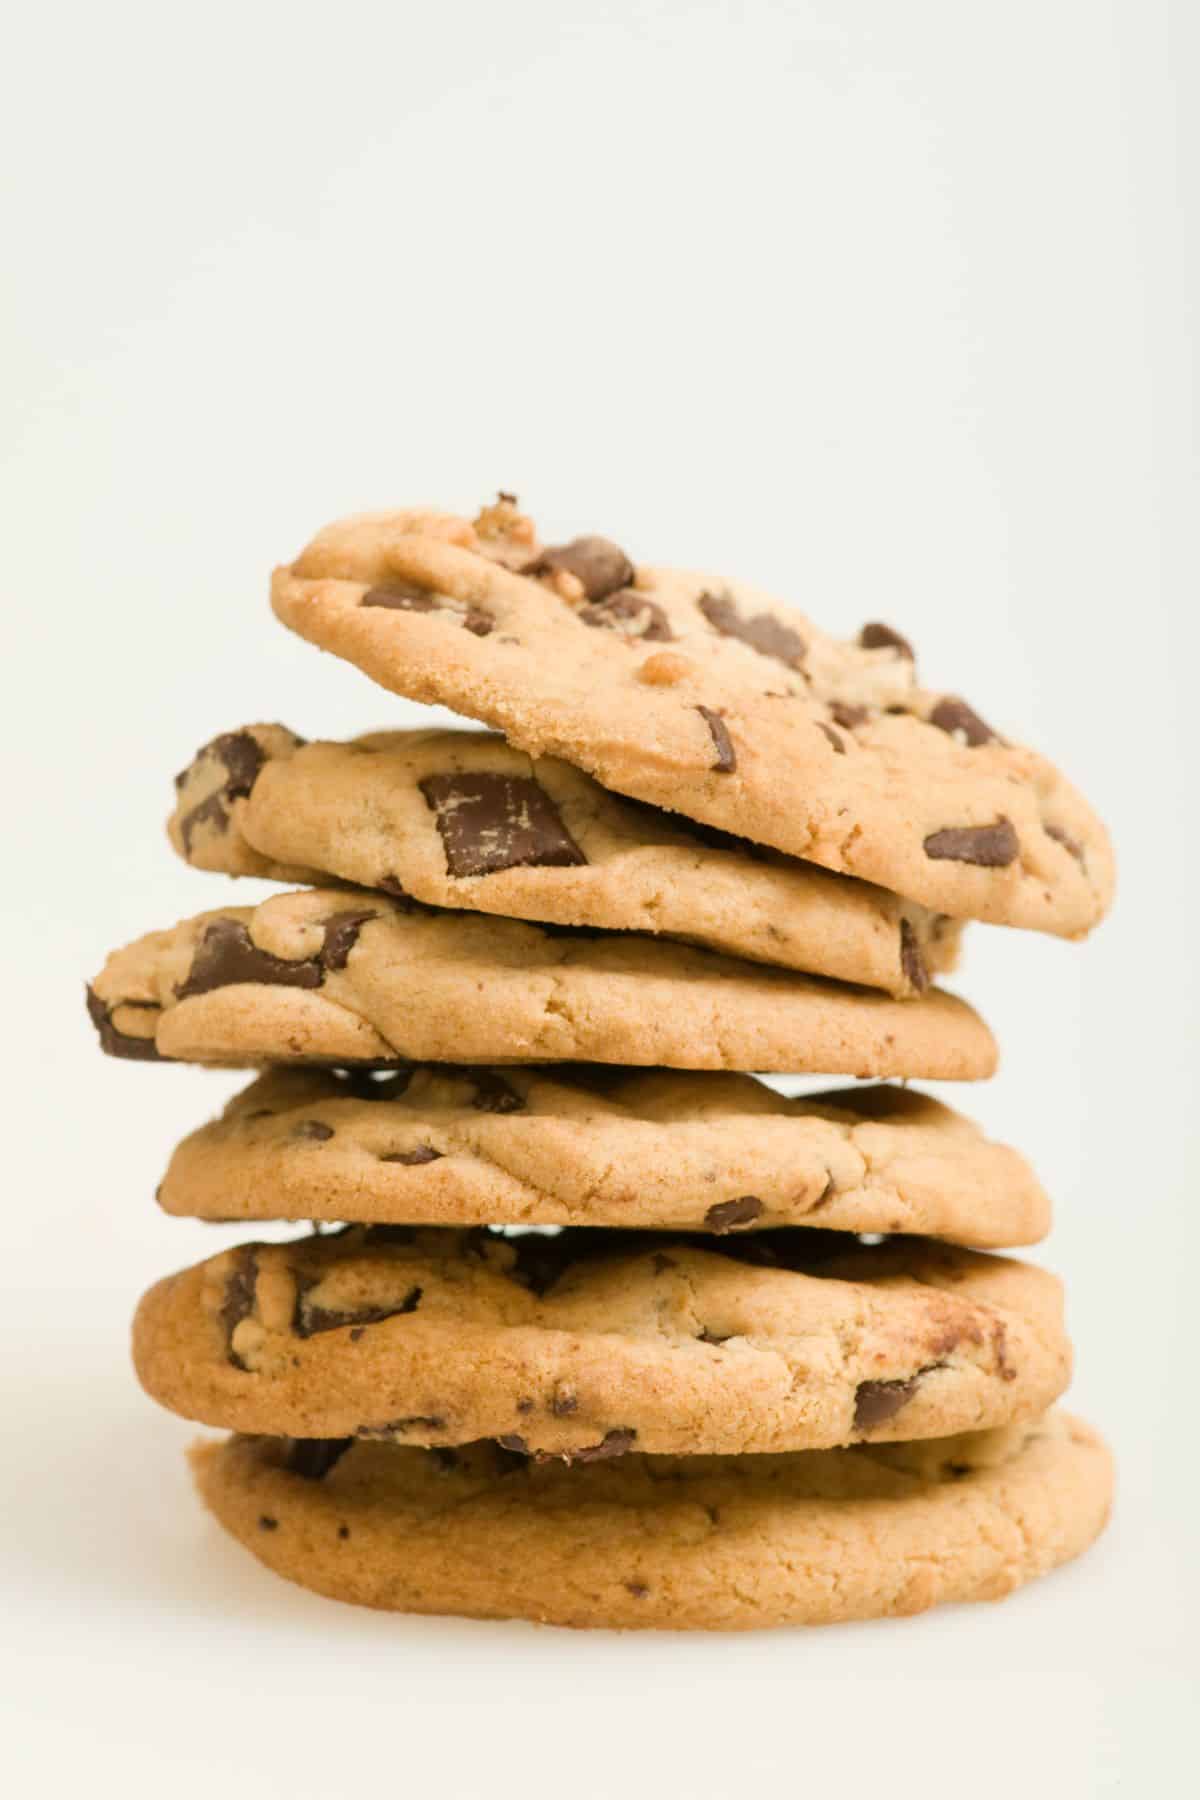 Stack of six chocolate chip cookies.